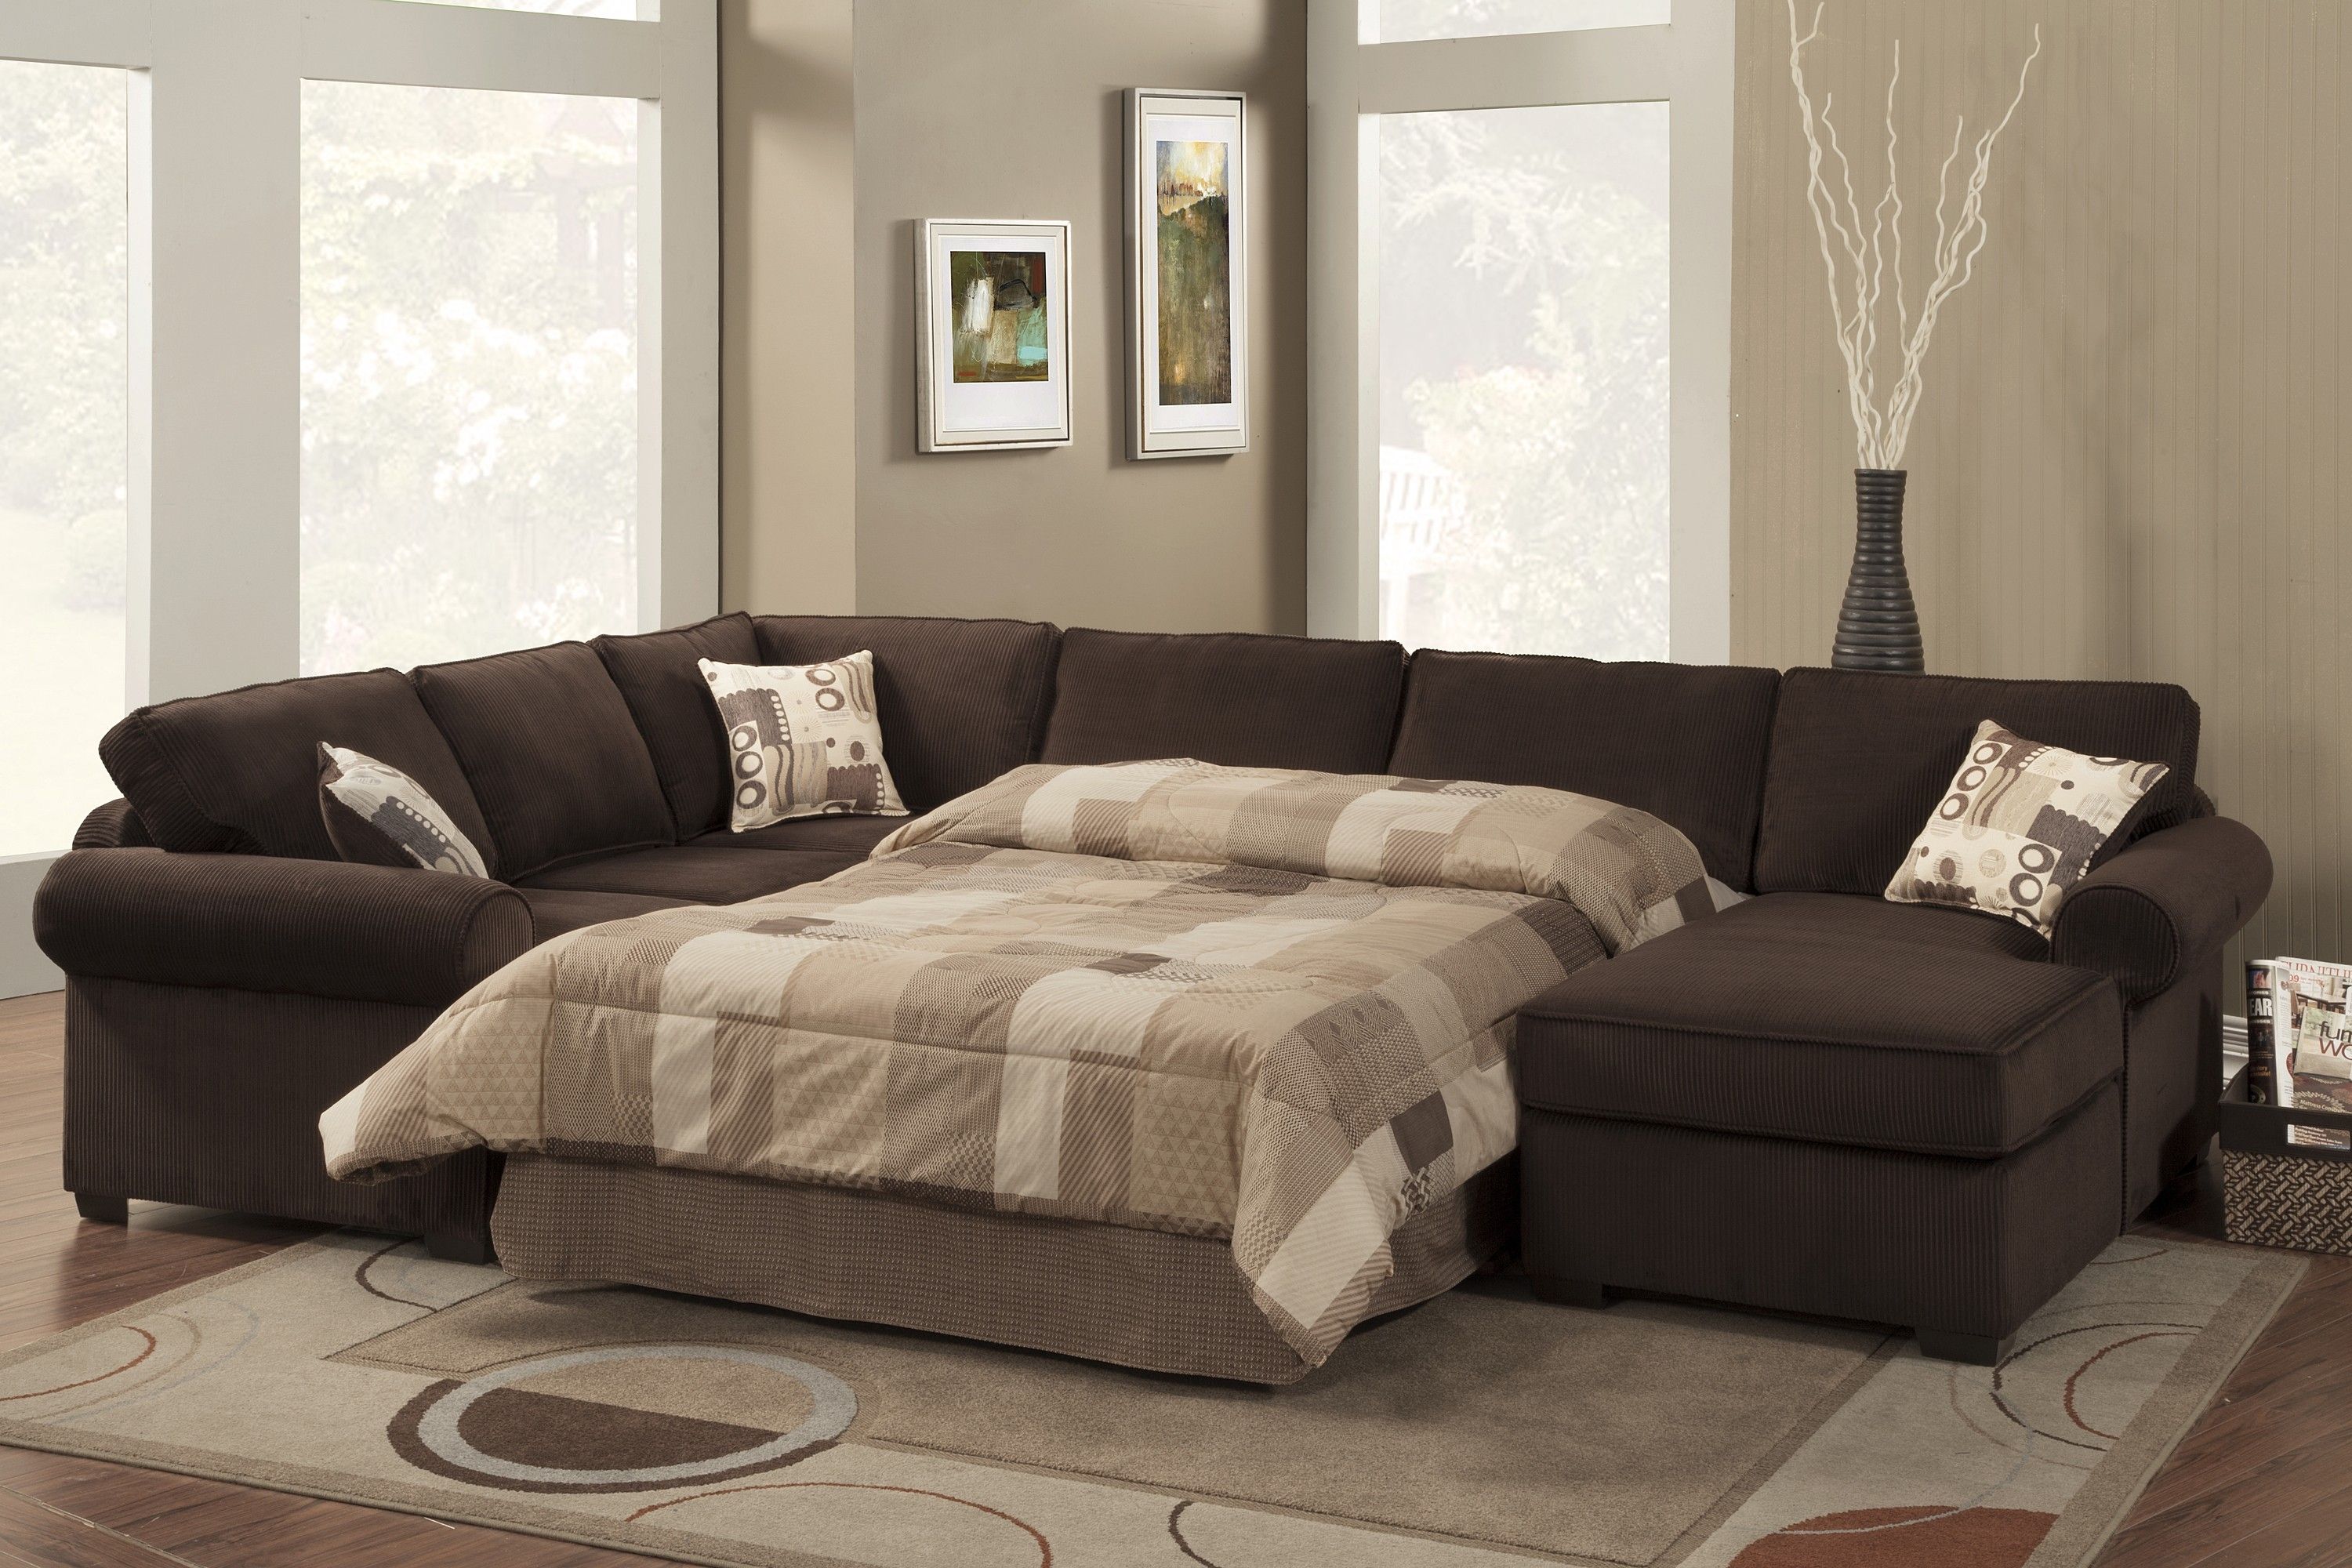 3 sectional sofa bed